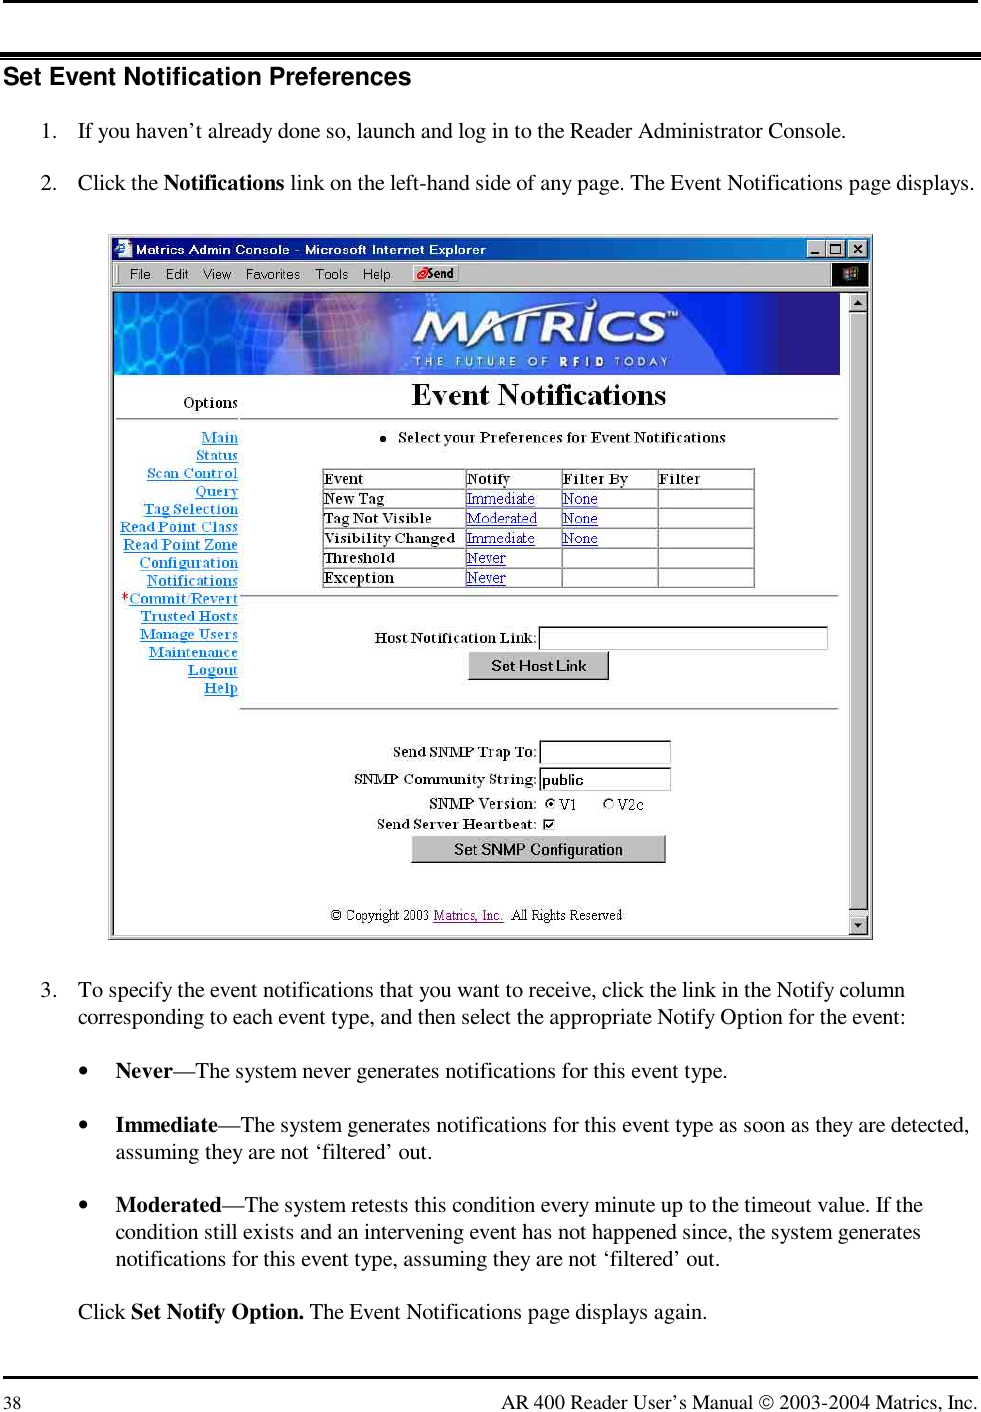  38  AR 400 Reader User’s Manual  2003-2004 Matrics, Inc. Set Event Notification Preferences 1.  If you haven’t already done so, launch and log in to the Reader Administrator Console. 2. Click the Notifications link on the left-hand side of any page. The Event Notifications page displays.  3.  To specify the event notifications that you want to receive, click the link in the Notify column corresponding to each event type, and then select the appropriate Notify Option for the event: •  Never—The system never generates notifications for this event type. •  Immediate—The system generates notifications for this event type as soon as they are detected, assuming they are not ‘filtered’ out. •  Moderated—The system retests this condition every minute up to the timeout value. If the condition still exists and an intervening event has not happened since, the system generates notifications for this event type, assuming they are not ‘filtered’ out. Click Set Notify Option. The Event Notifications page displays again. 